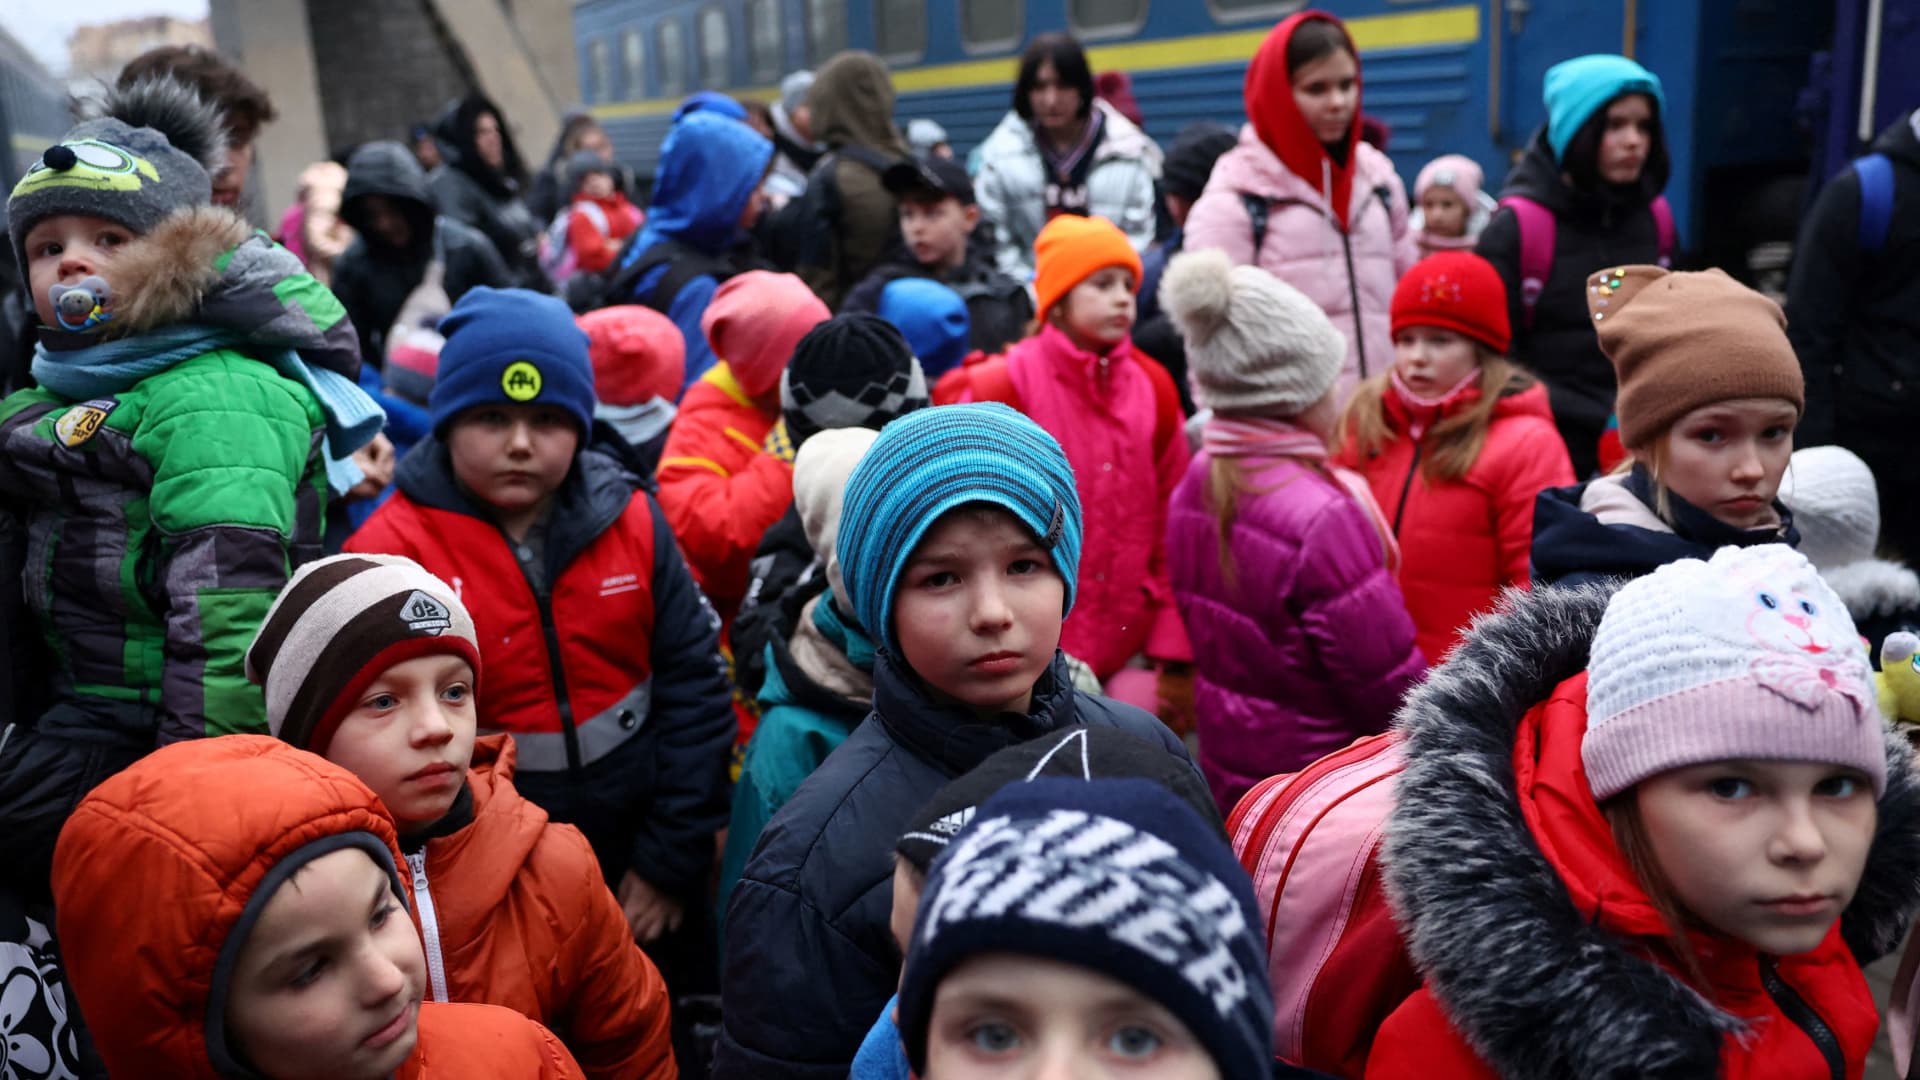 A group of children evacuated from an orphanage in Zaporizhzhia wait to board a bus for their transfer to Poland after fleeing the ongoing Russian invasion at the main train station in Lviv, Ukraine, March 5, 2022.